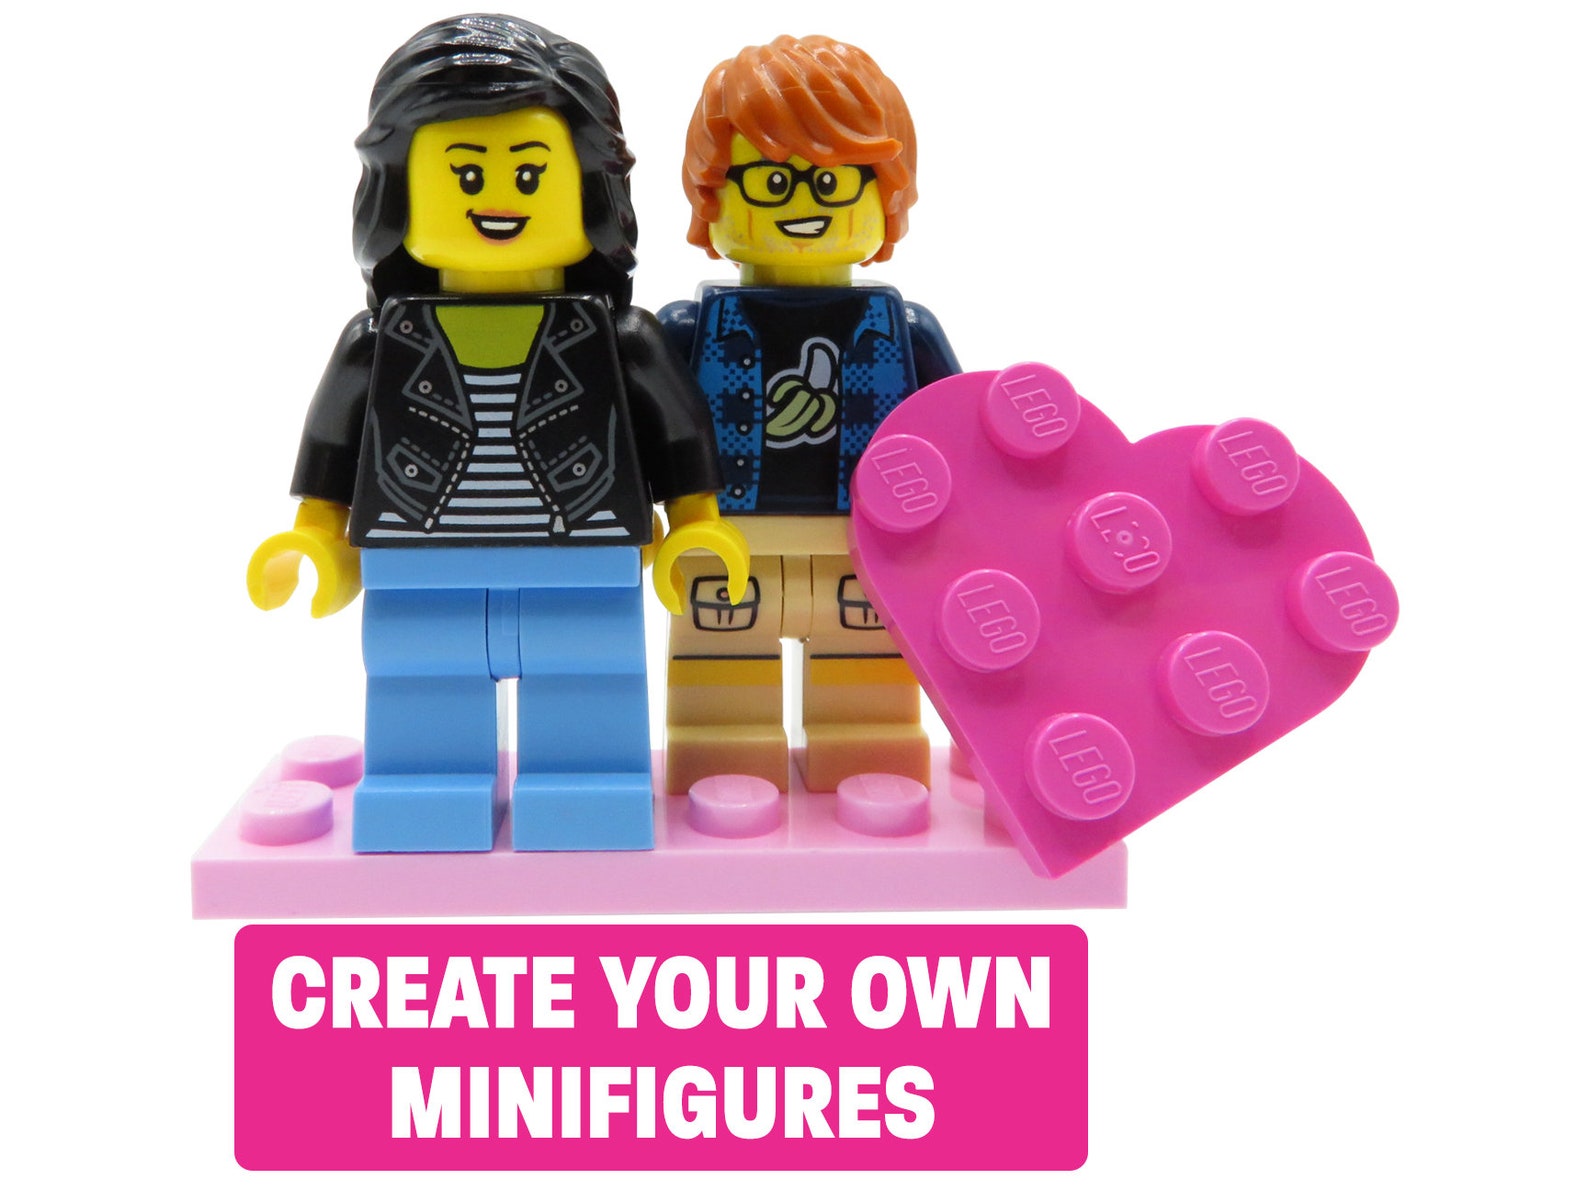 Couples in love - Personalized LEGO figures / Create your own LEGO minifigures - the best Valentine’s day / anniversary gift for her & him